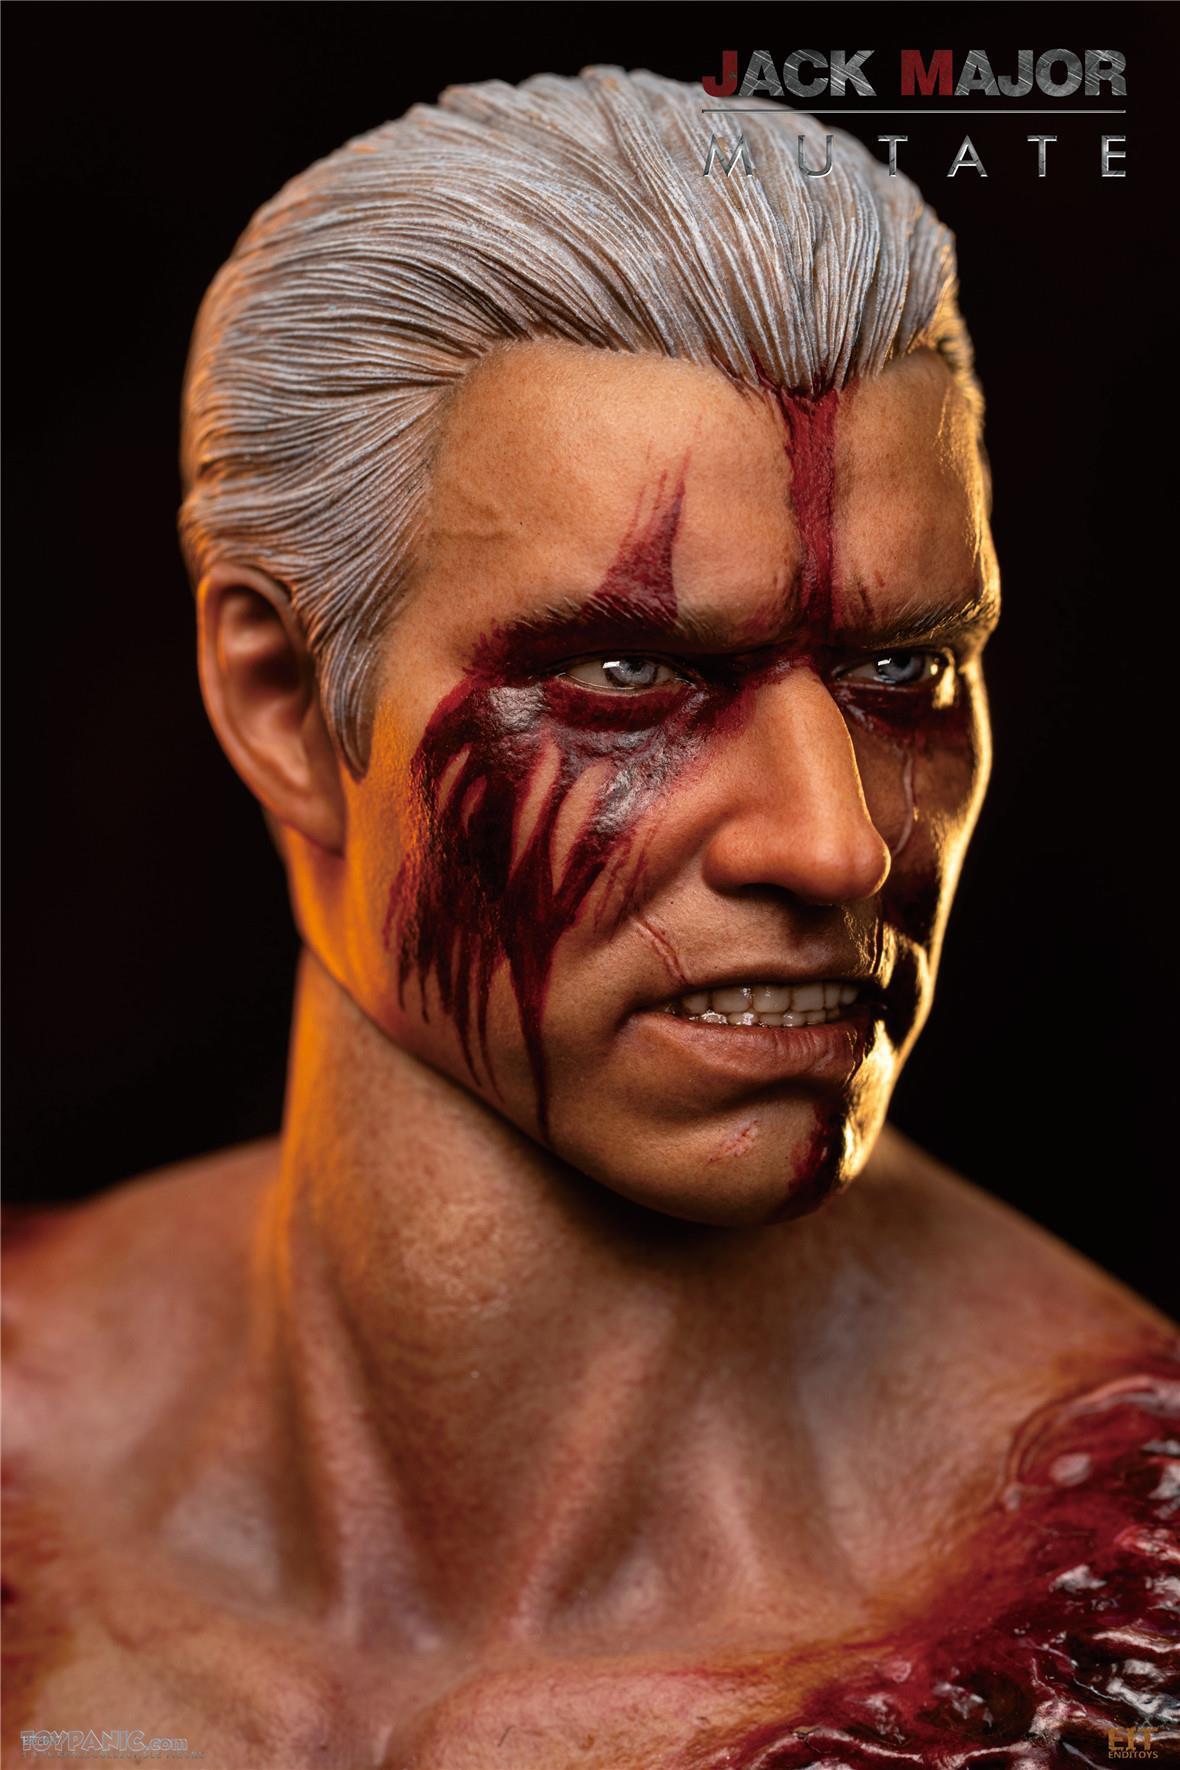 residentevil - NEW PRODUCT:  1/6 Jack Major Mutate from End I Toys  2732024105952AM_6151206